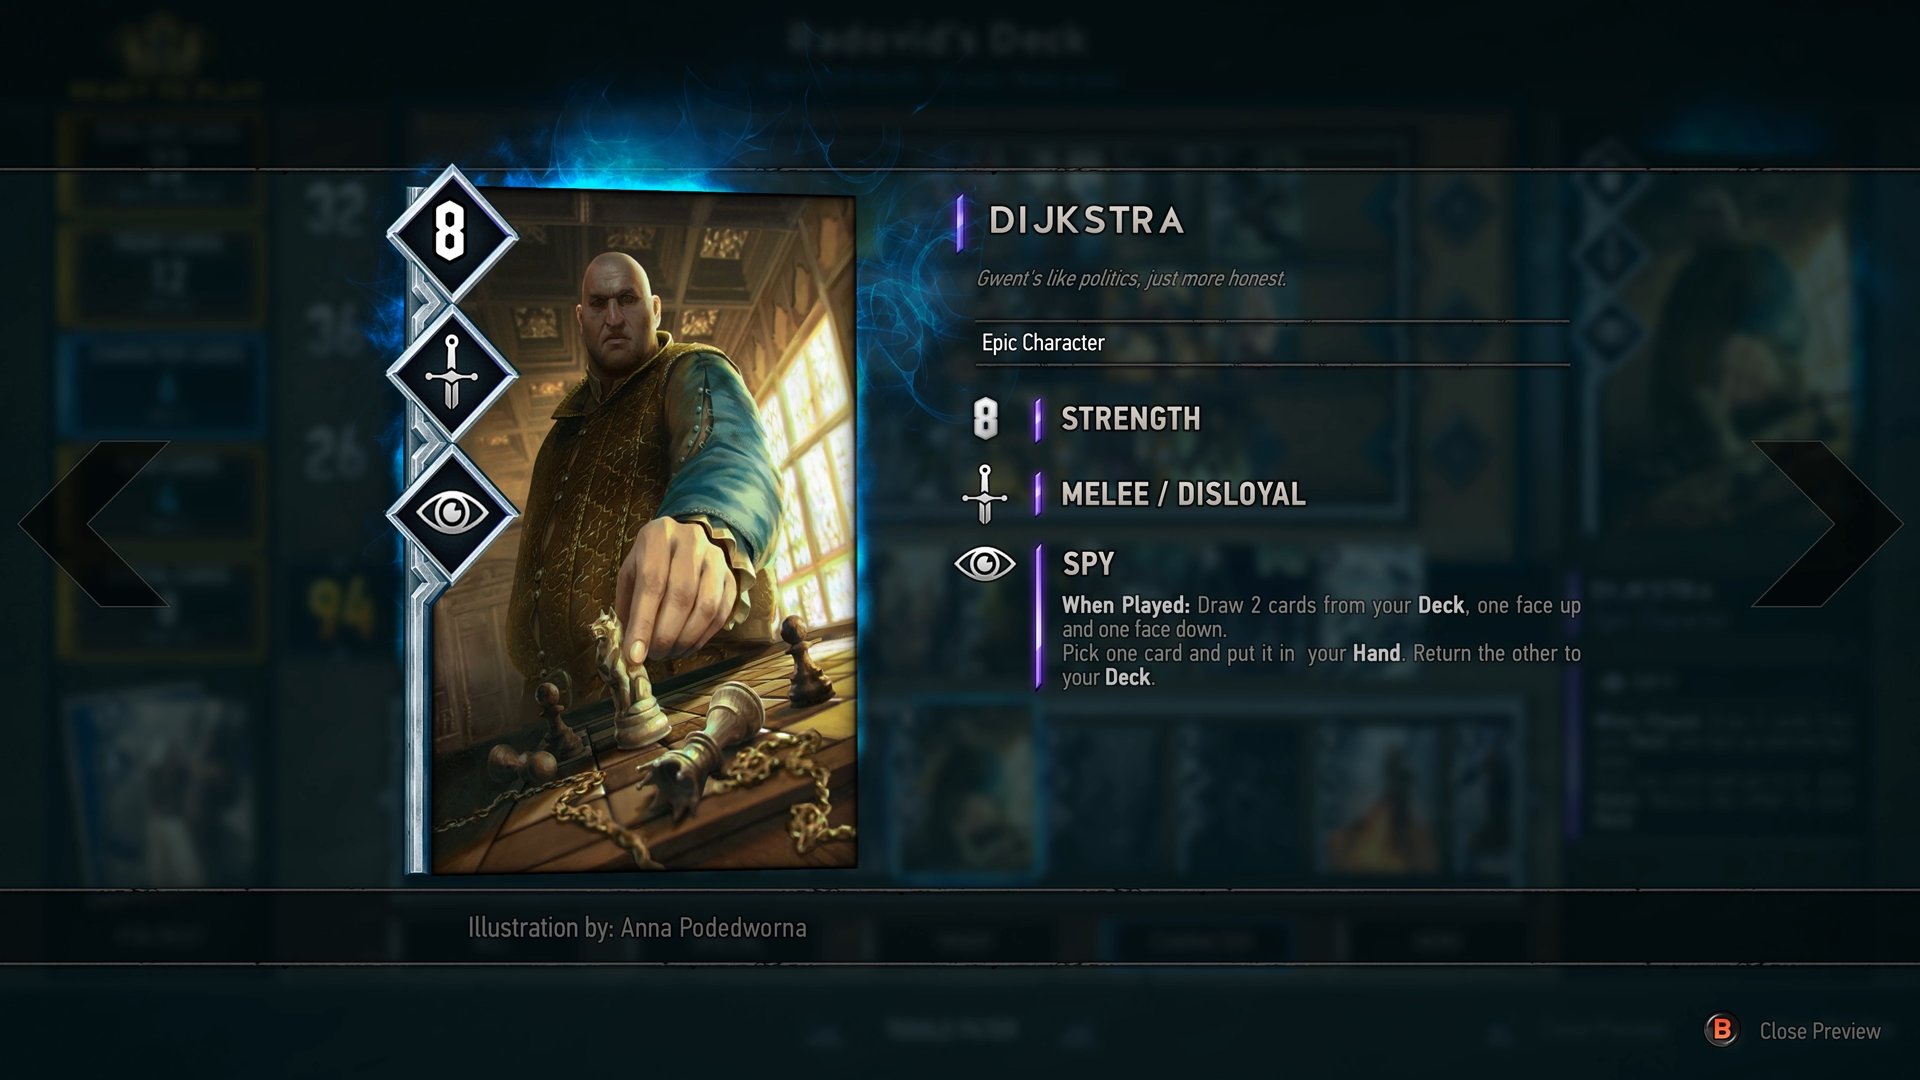 Gwent: The Witcher Card Game